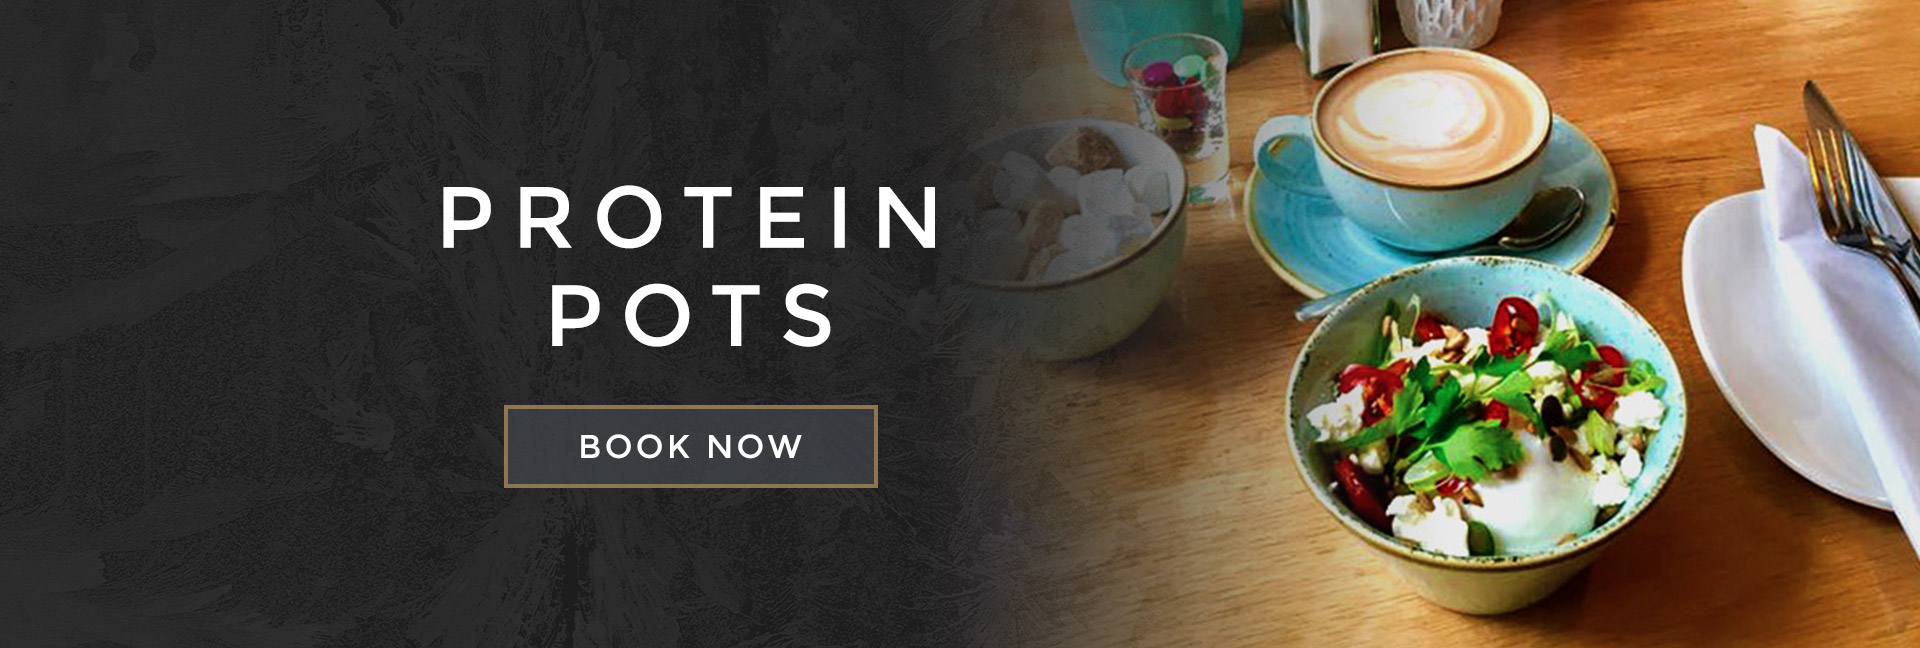 Protein pots at All Bar One Exchange Edinburgh - Book your table